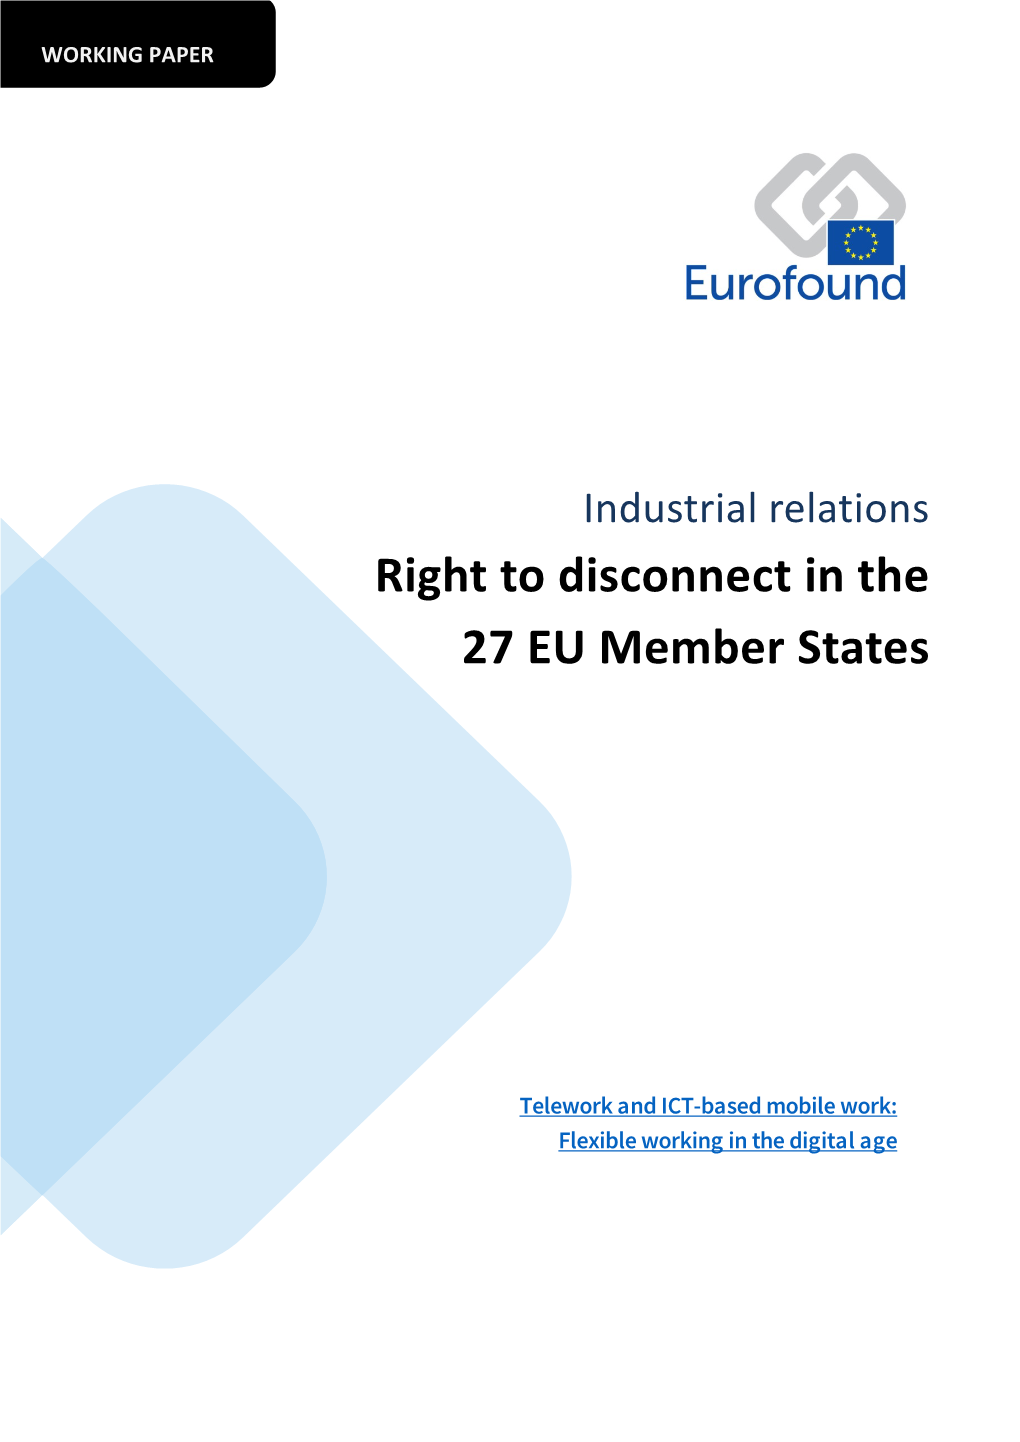 Right to Disconnect in the 27 EU Member States